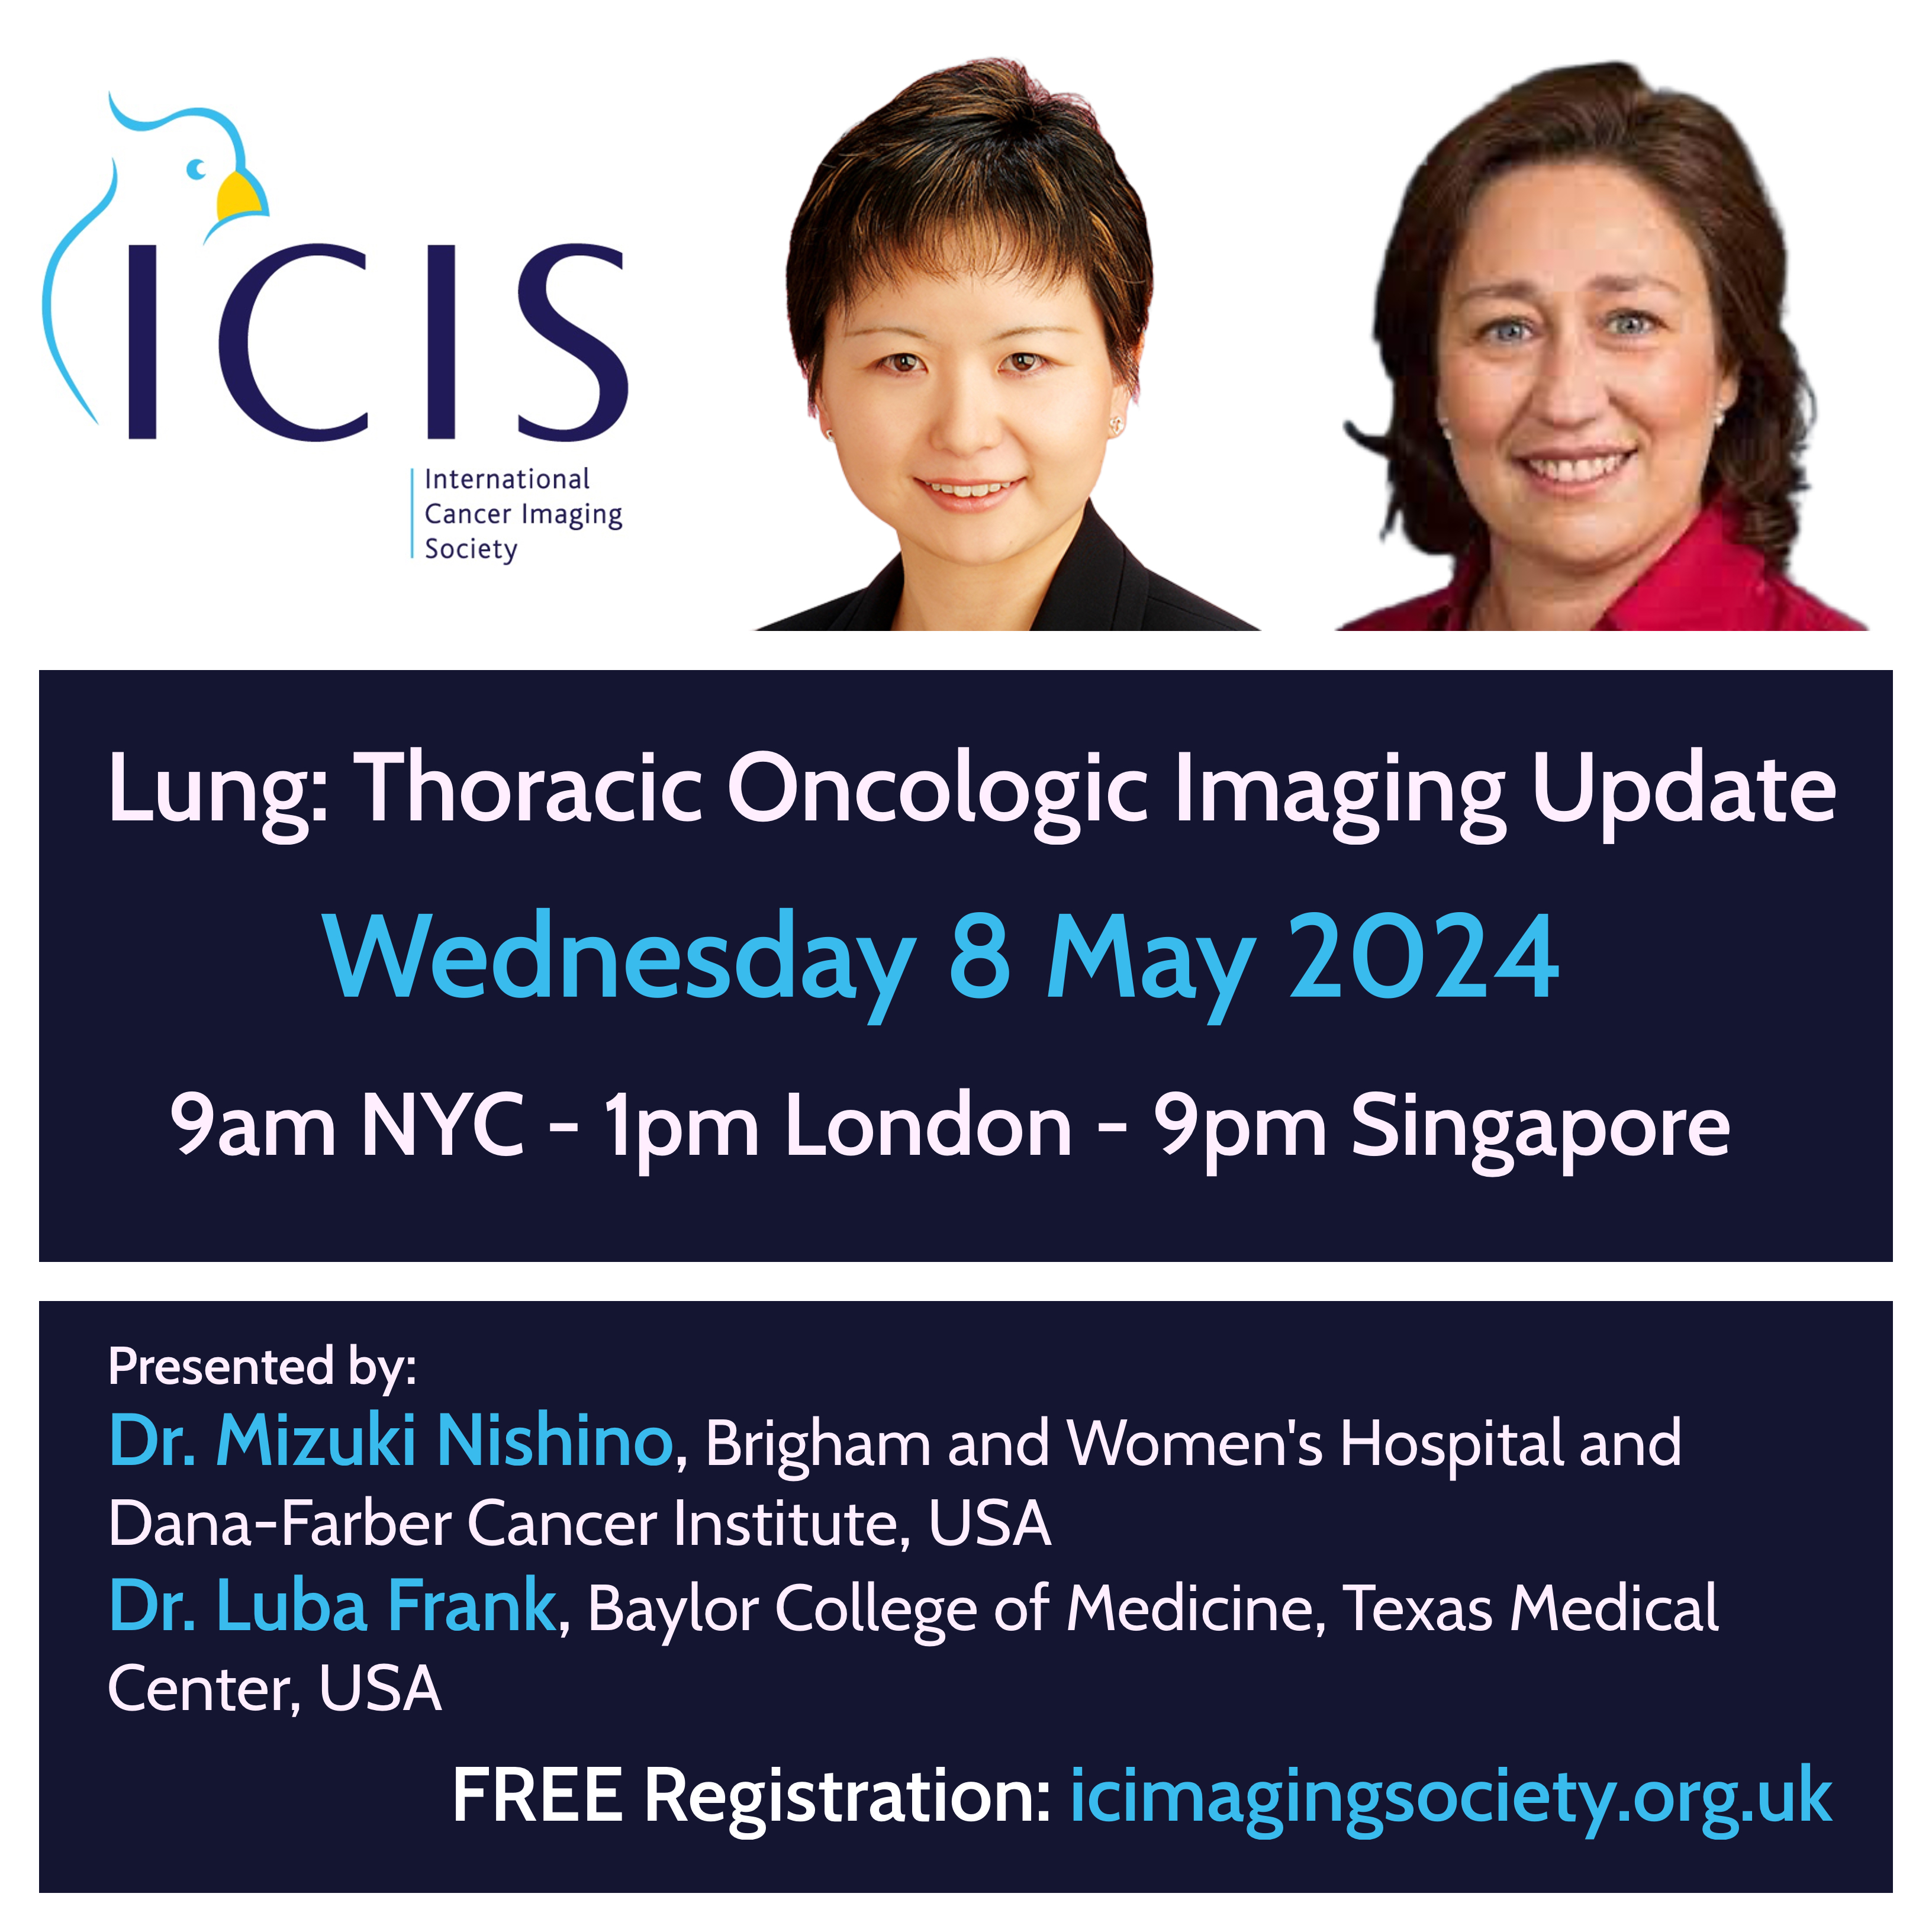 Lung: Thoracic Oncologic Imaging Update